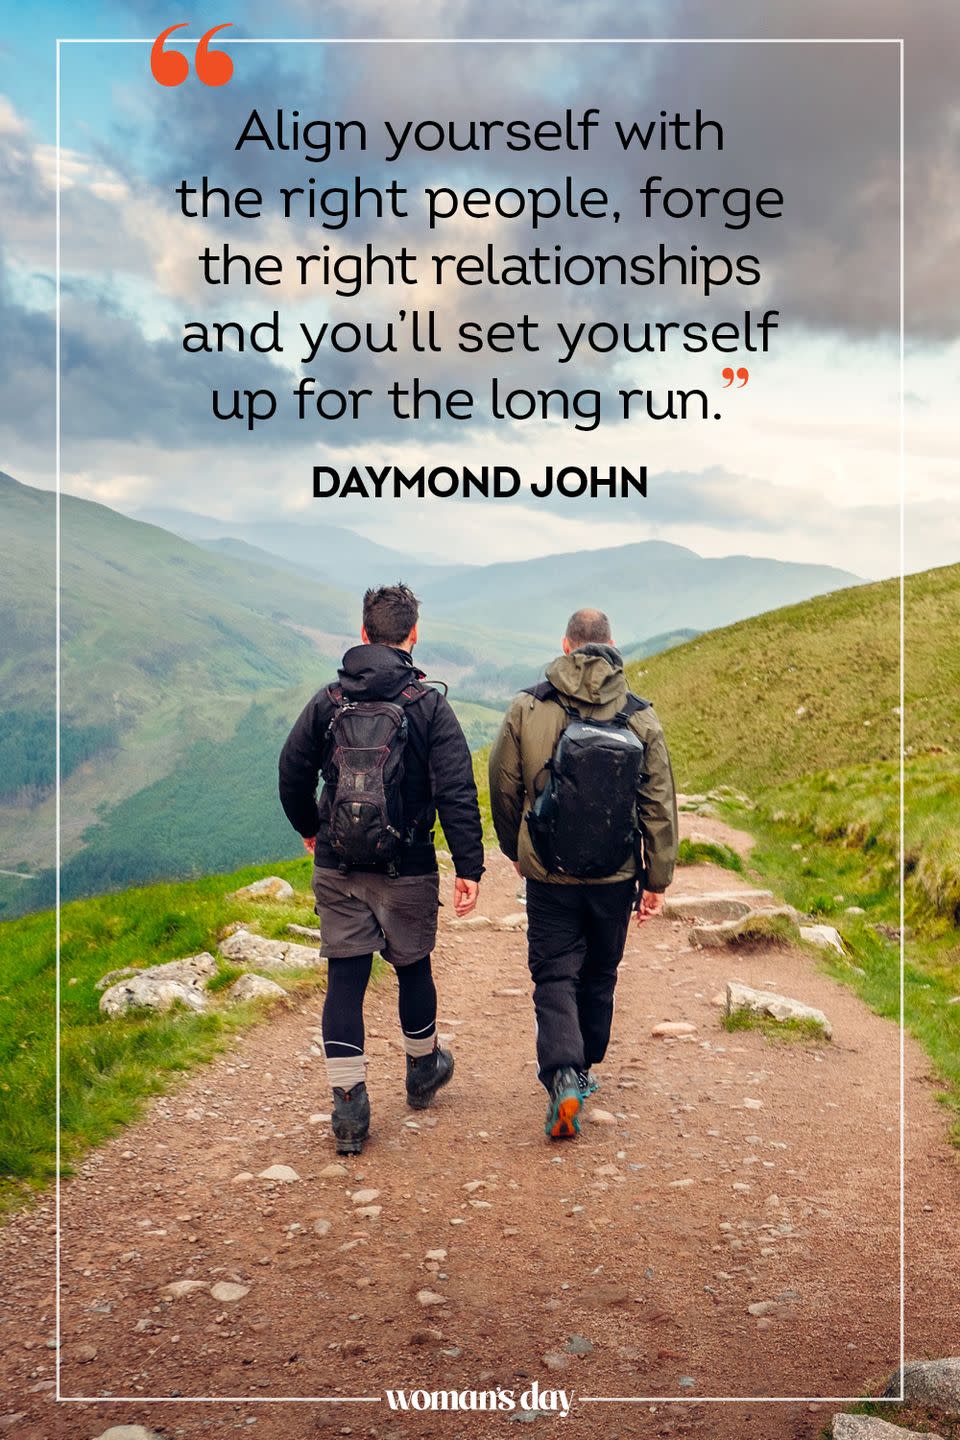 <p>“Align yourself with the right people, forge the right relationships and you’ll set yourself up for the long run.” </p>